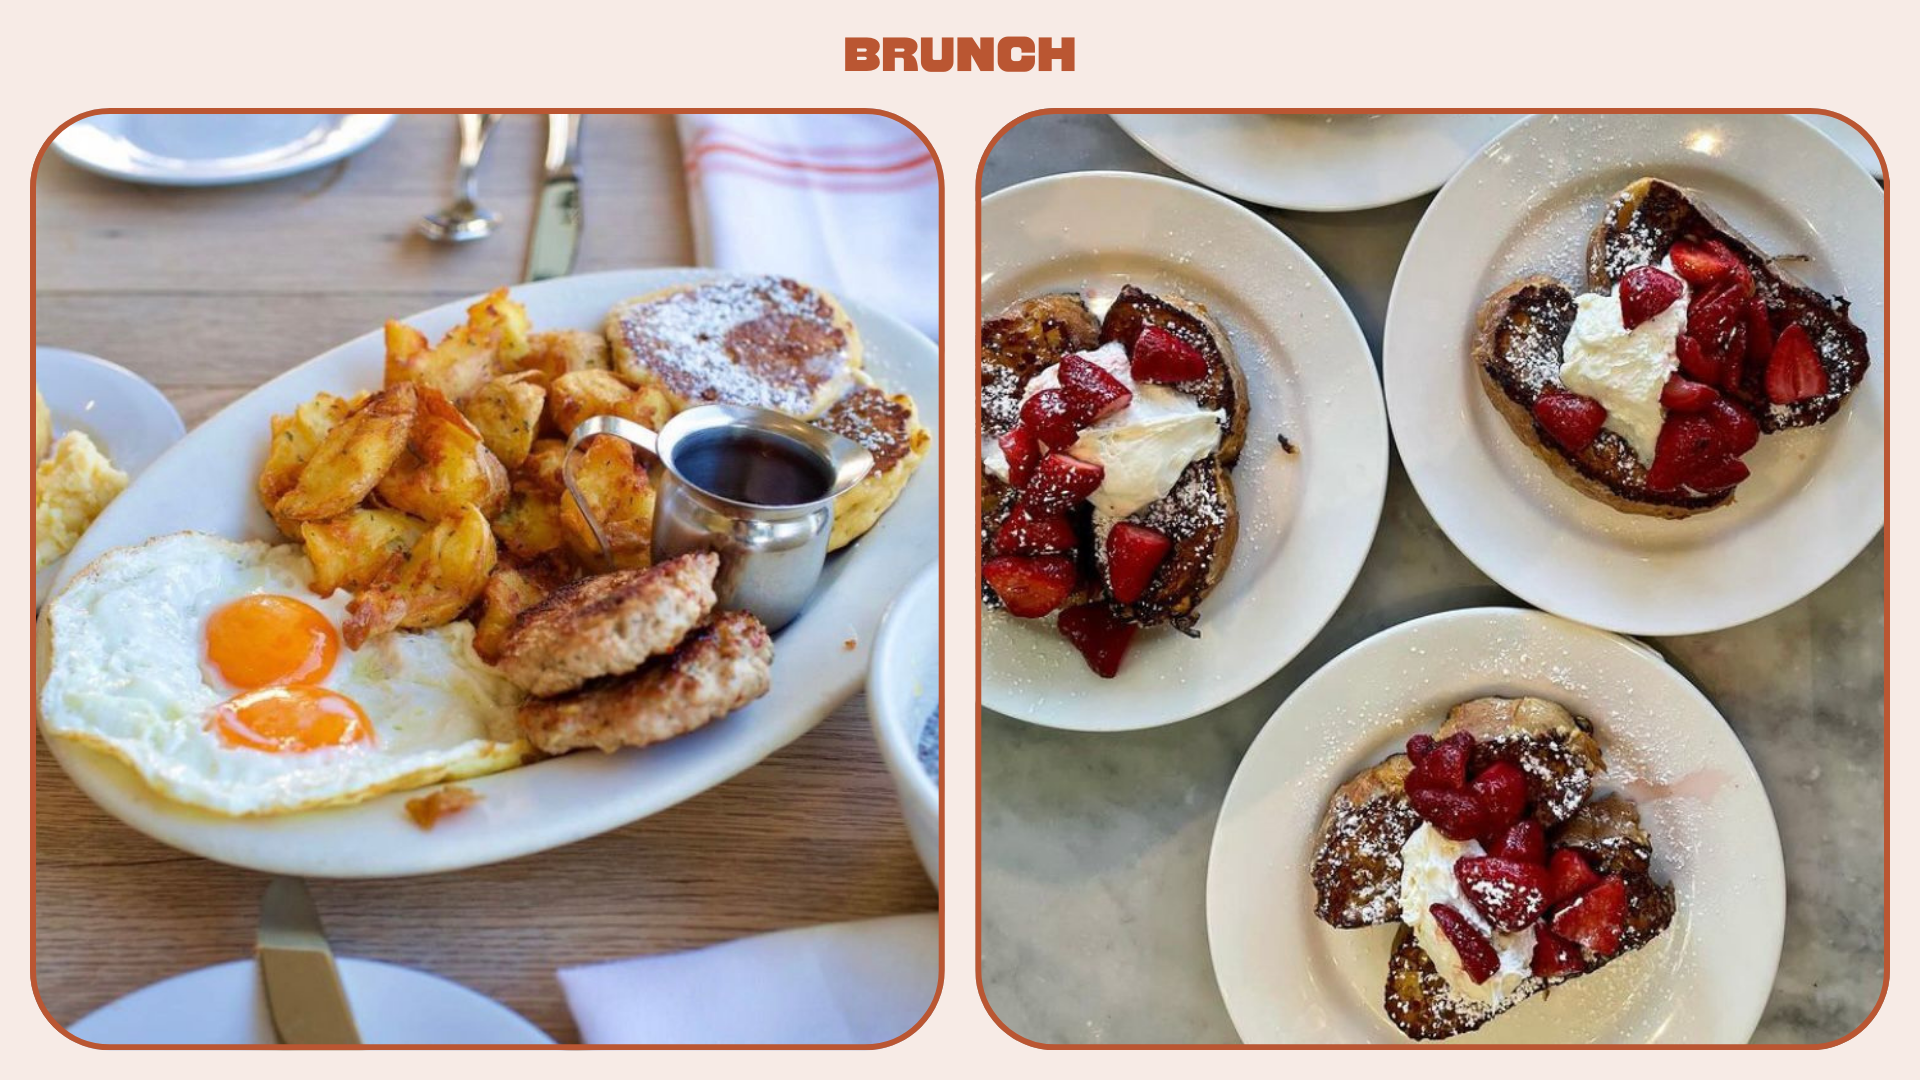 L: Plate of eggs and fried potatoes. R: French toast with raspberries